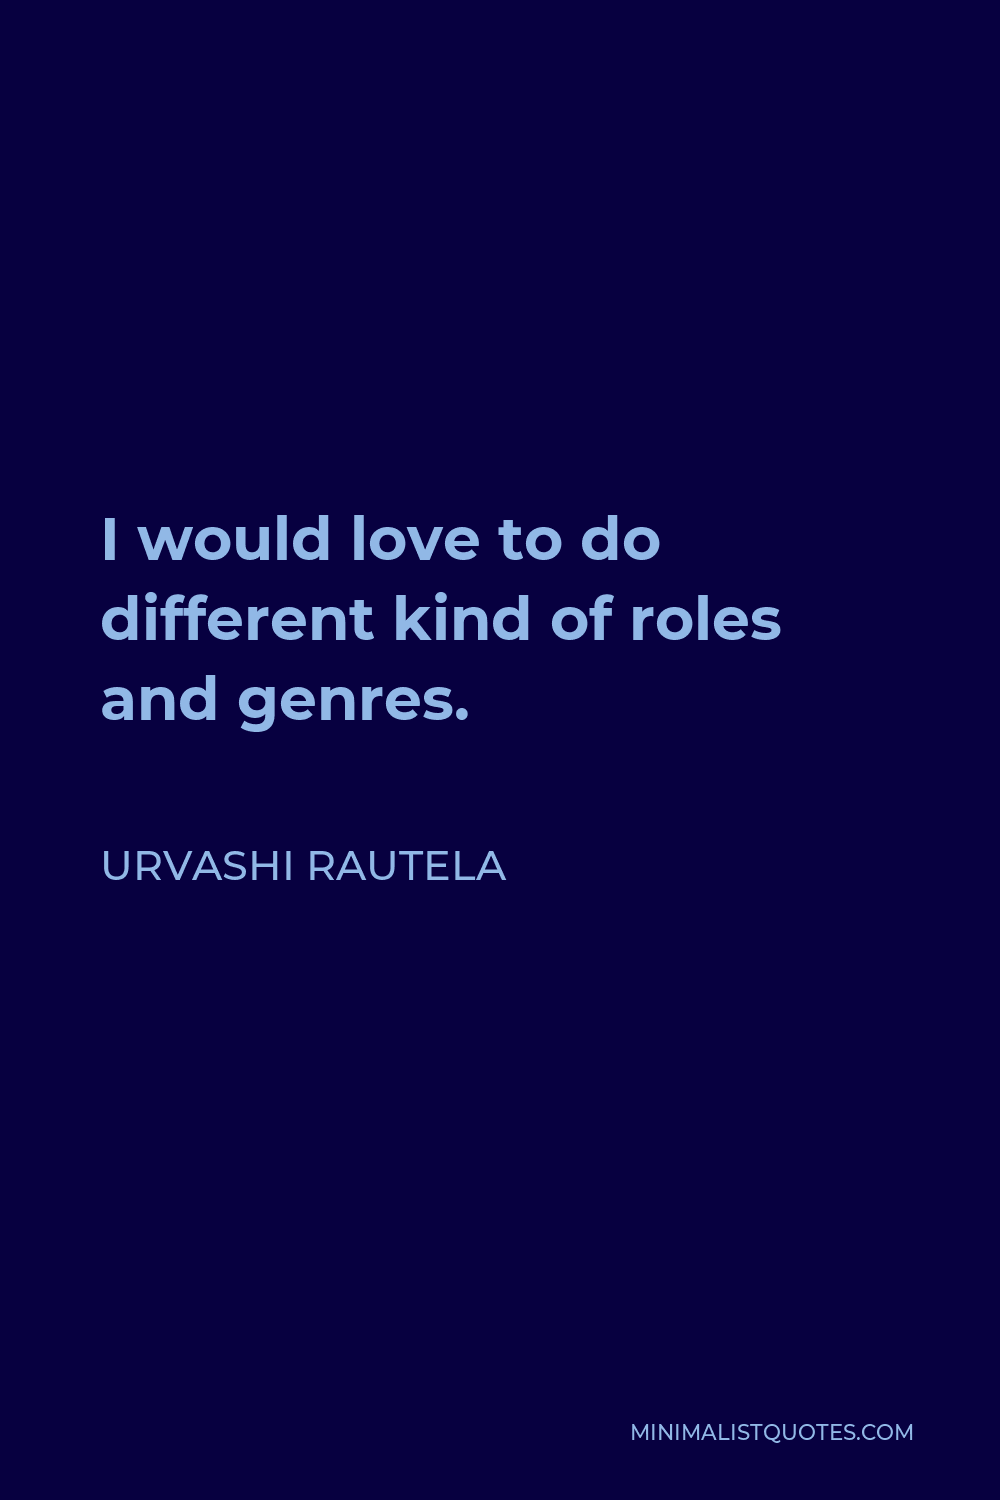 Urvashi Rautela Quote - I would love to do different kind of roles and genres.